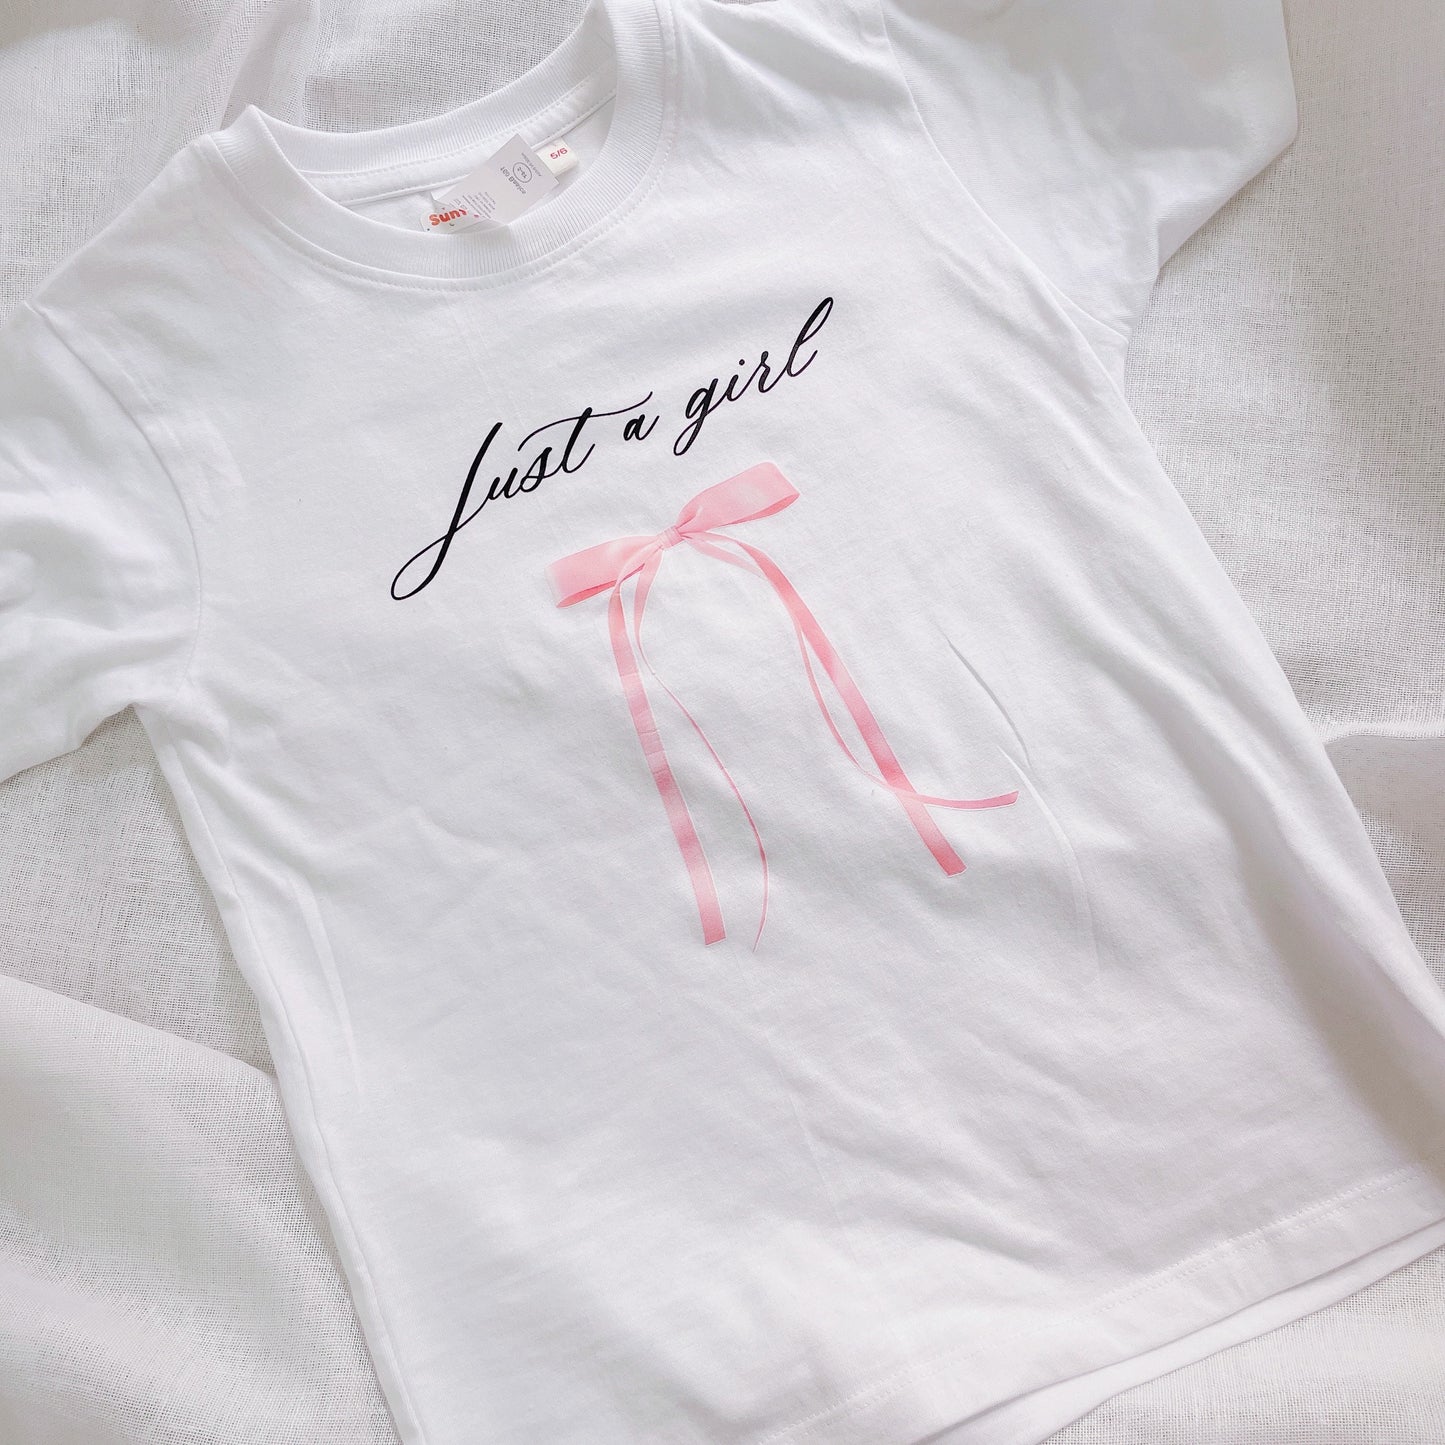 Just a girl bow Baby tee